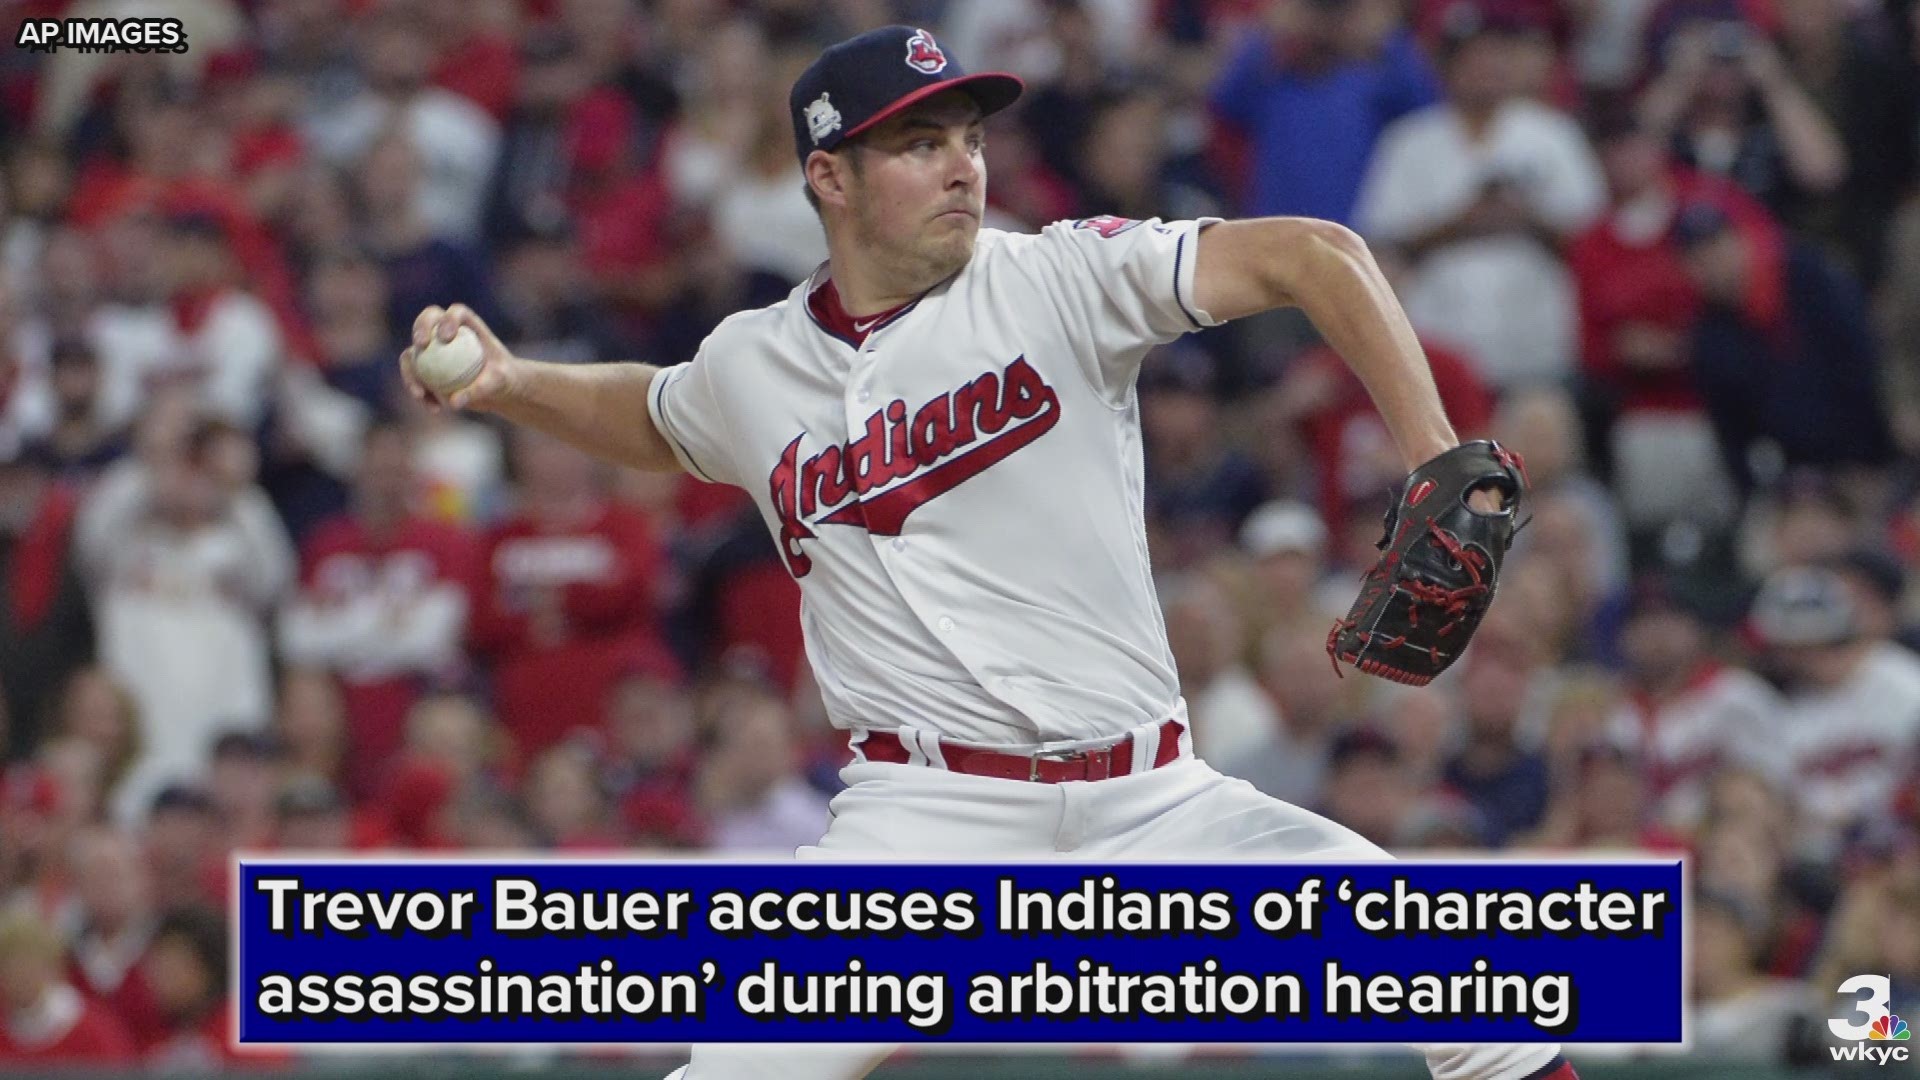 Starting pitcher Trevor Bauer has accused the Cleveland Indians of ‘character assassination’ during their arbitration hearing.